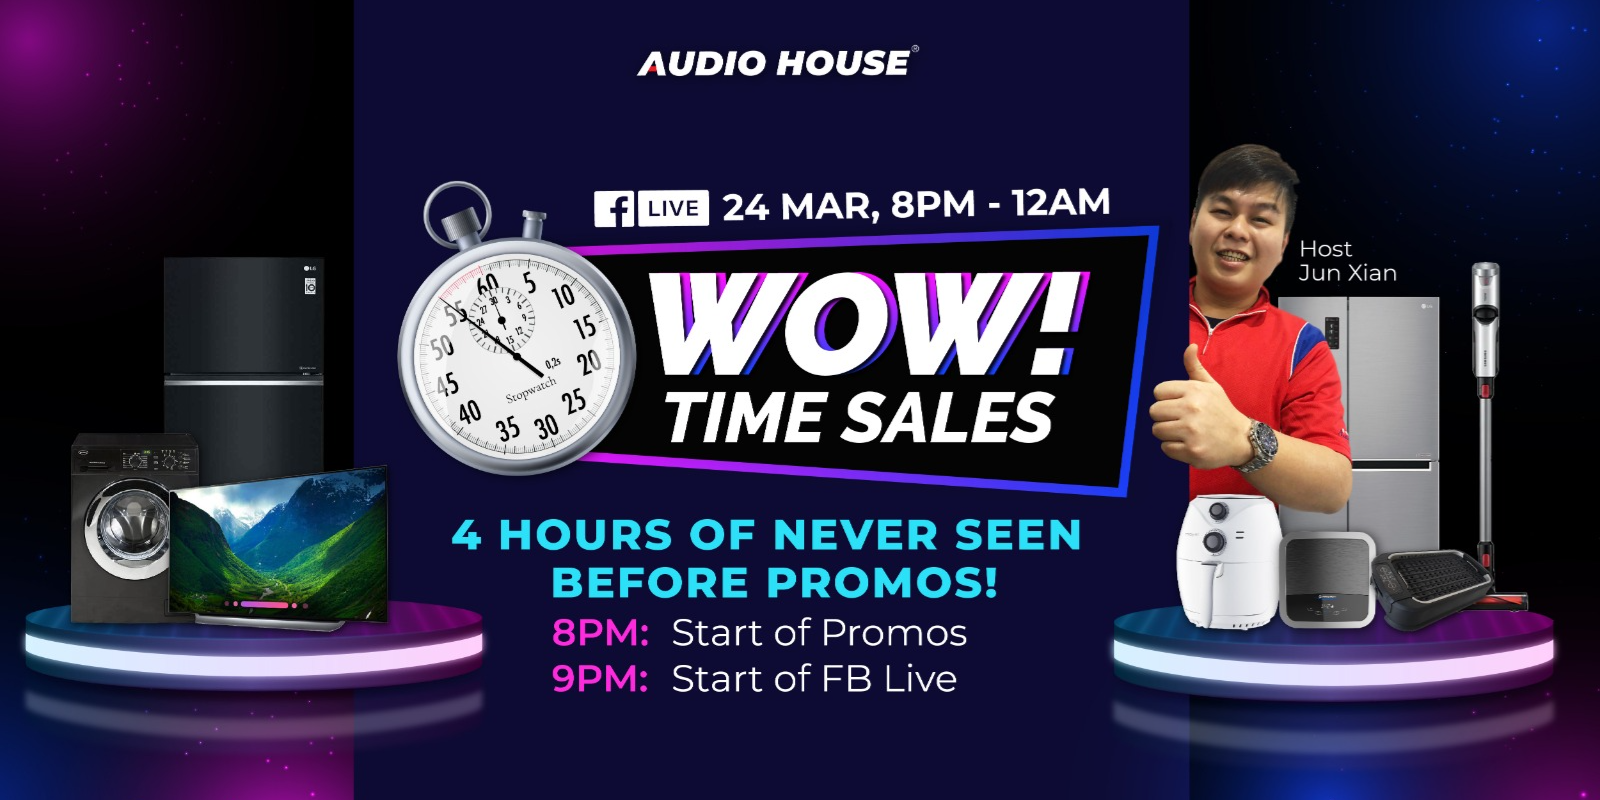 Audio House Wow! Time Sales